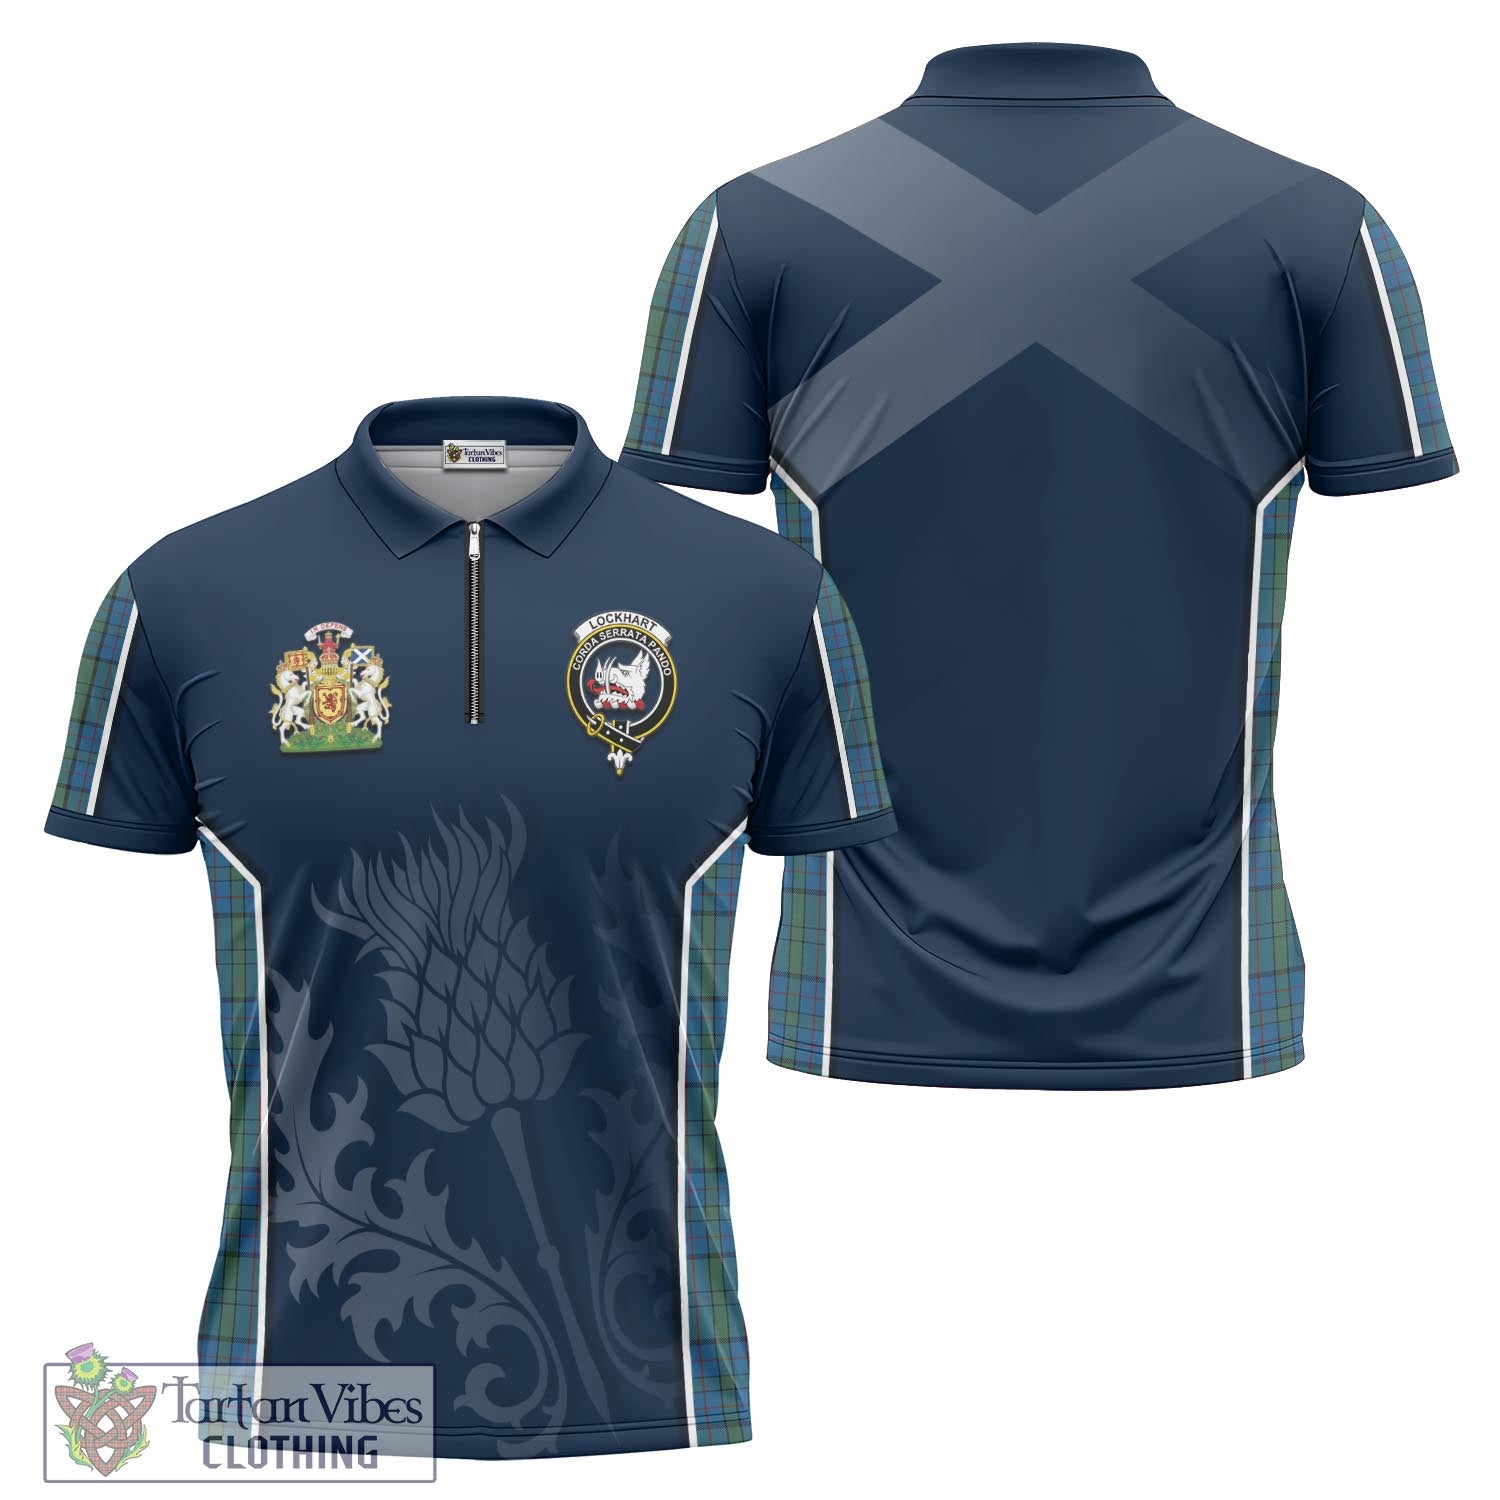 Tartan Vibes Clothing Lockhart Tartan Zipper Polo Shirt with Family Crest and Scottish Thistle Vibes Sport Style